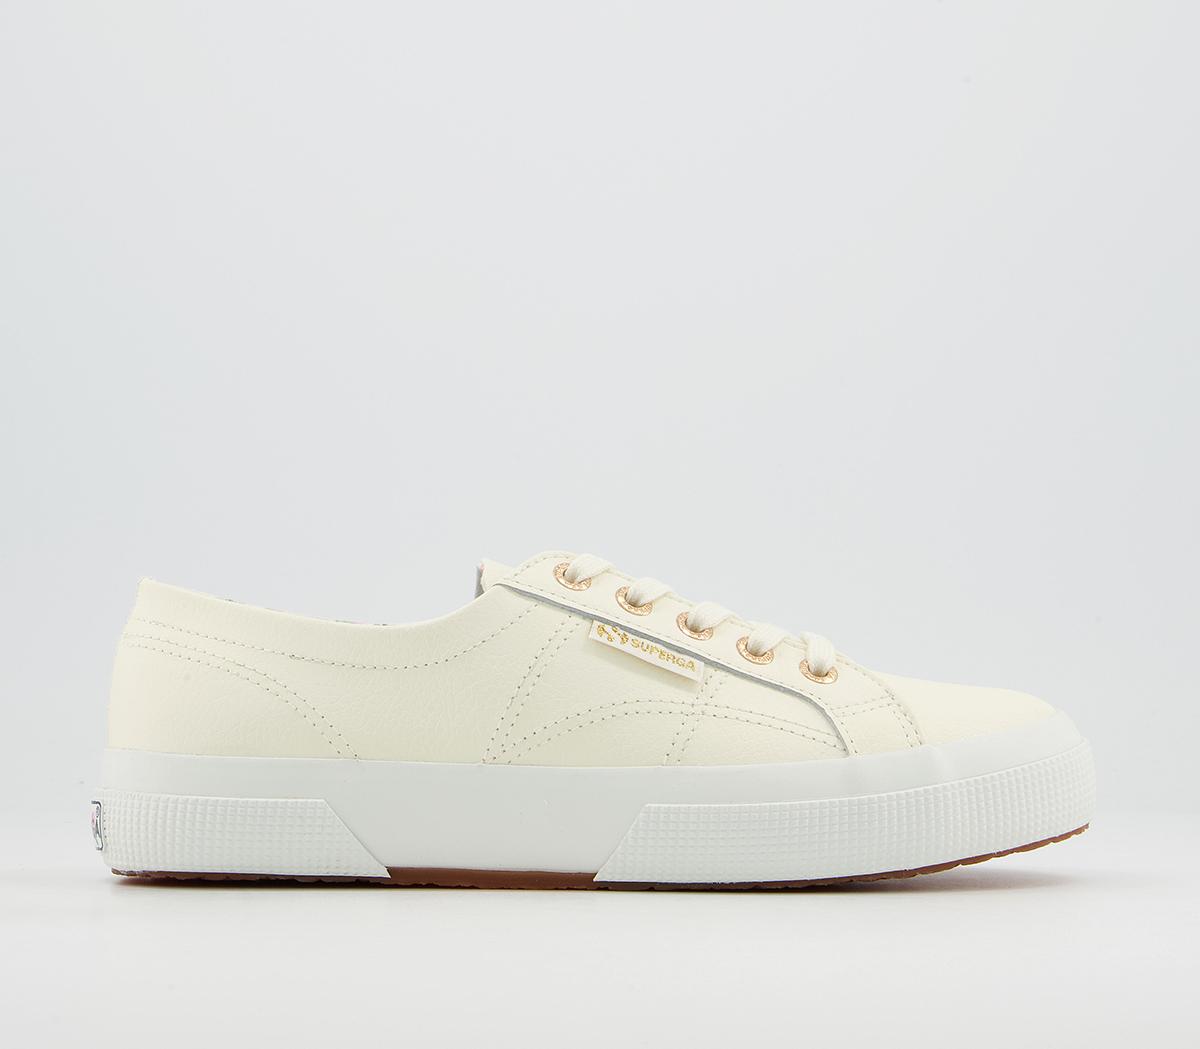 Superga2750 TrainersPristine Off White Leather Floral Exclusive